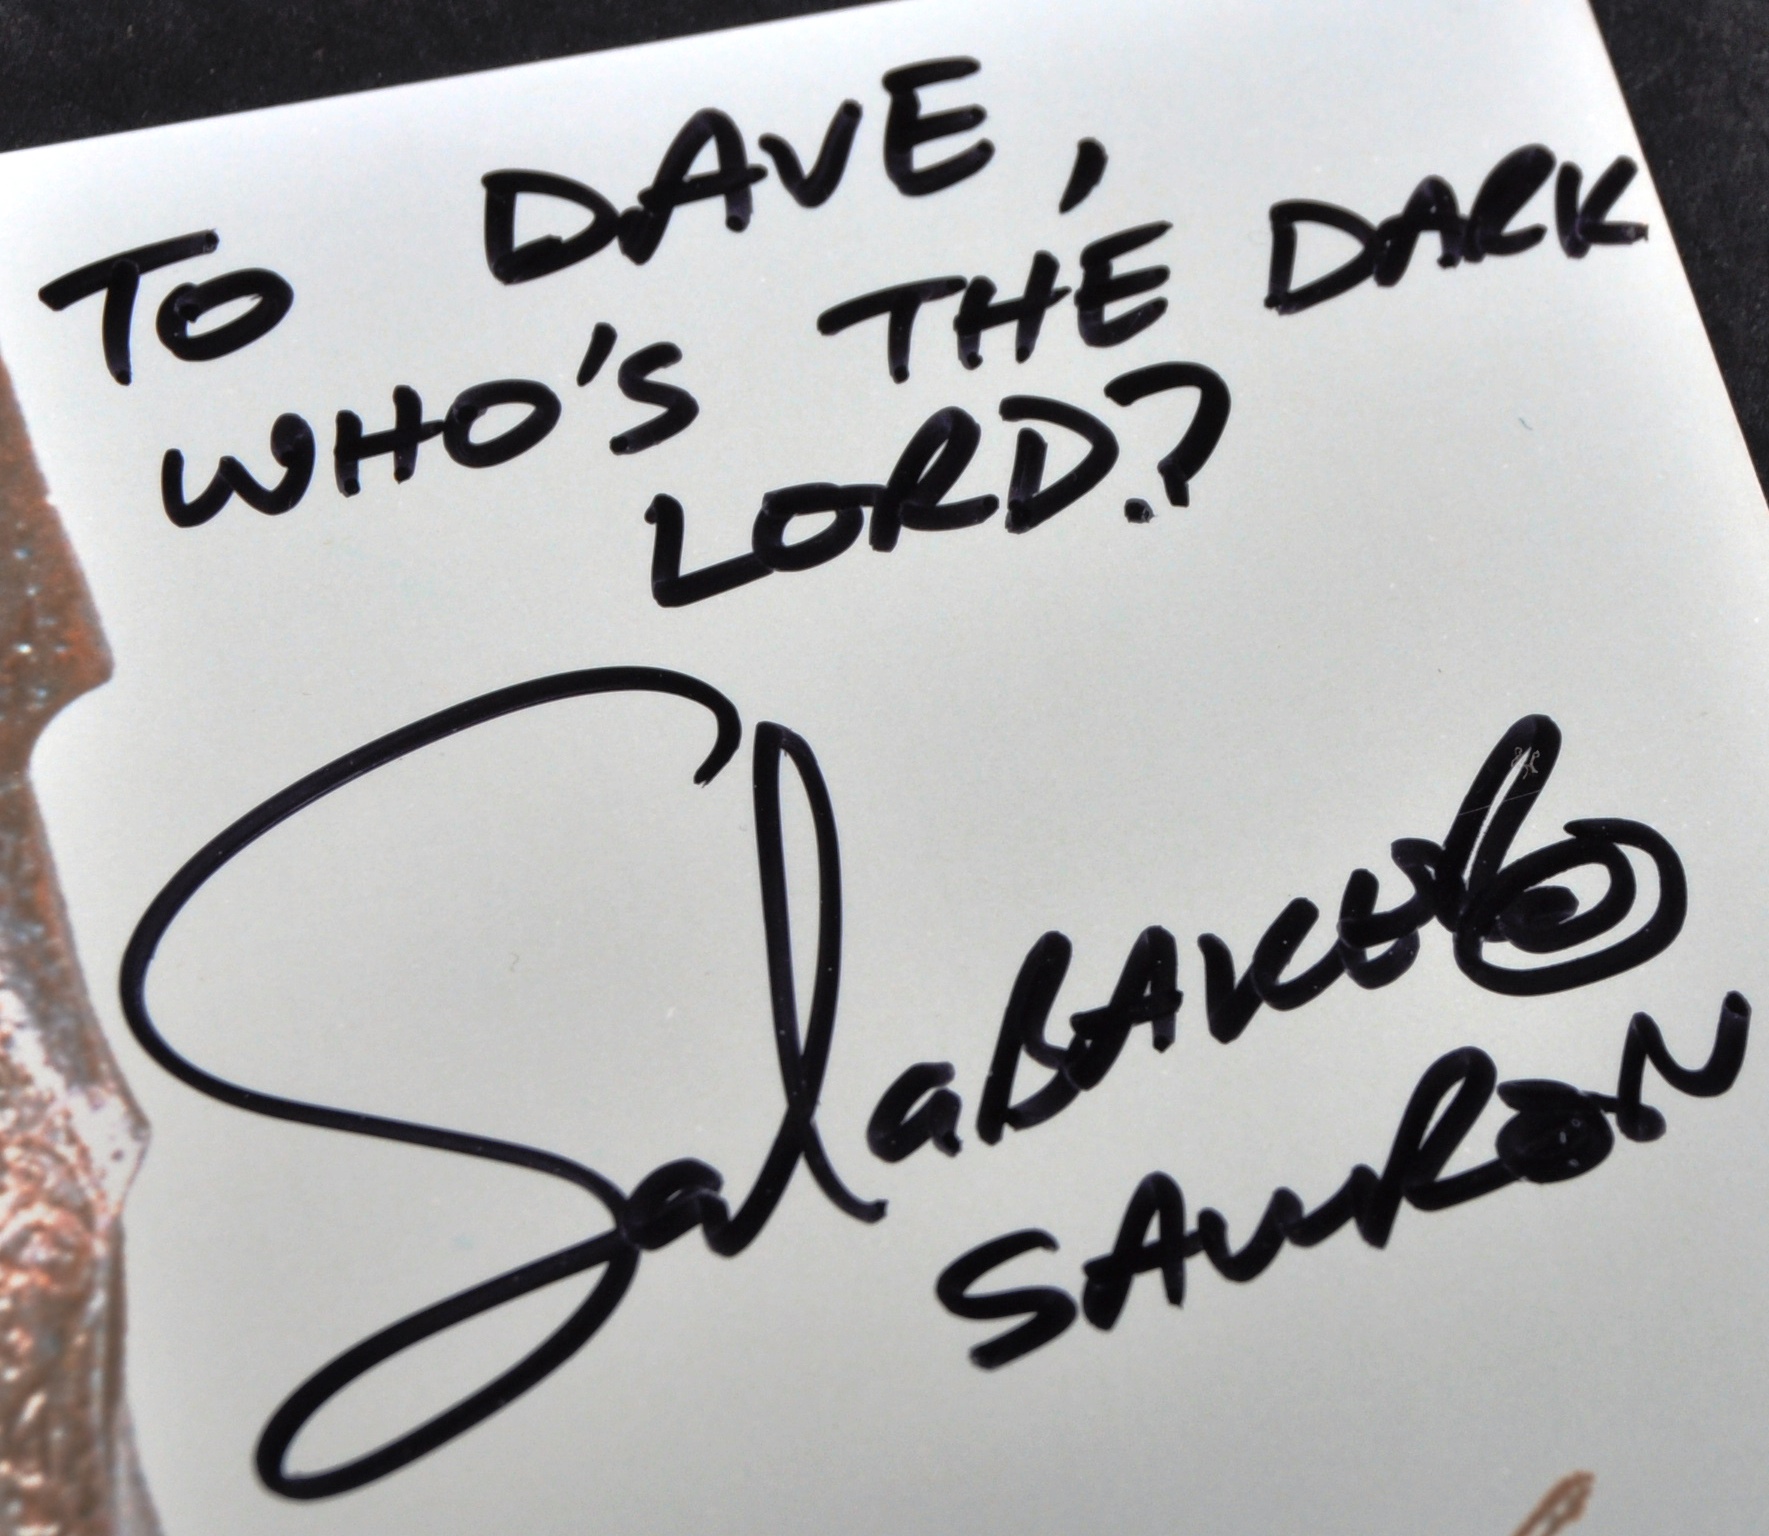 ESTATE OF DAVE PROWSE - LORD OF THE RINGS - SALA BAKER SIGNED PHOTO - Image 2 of 2